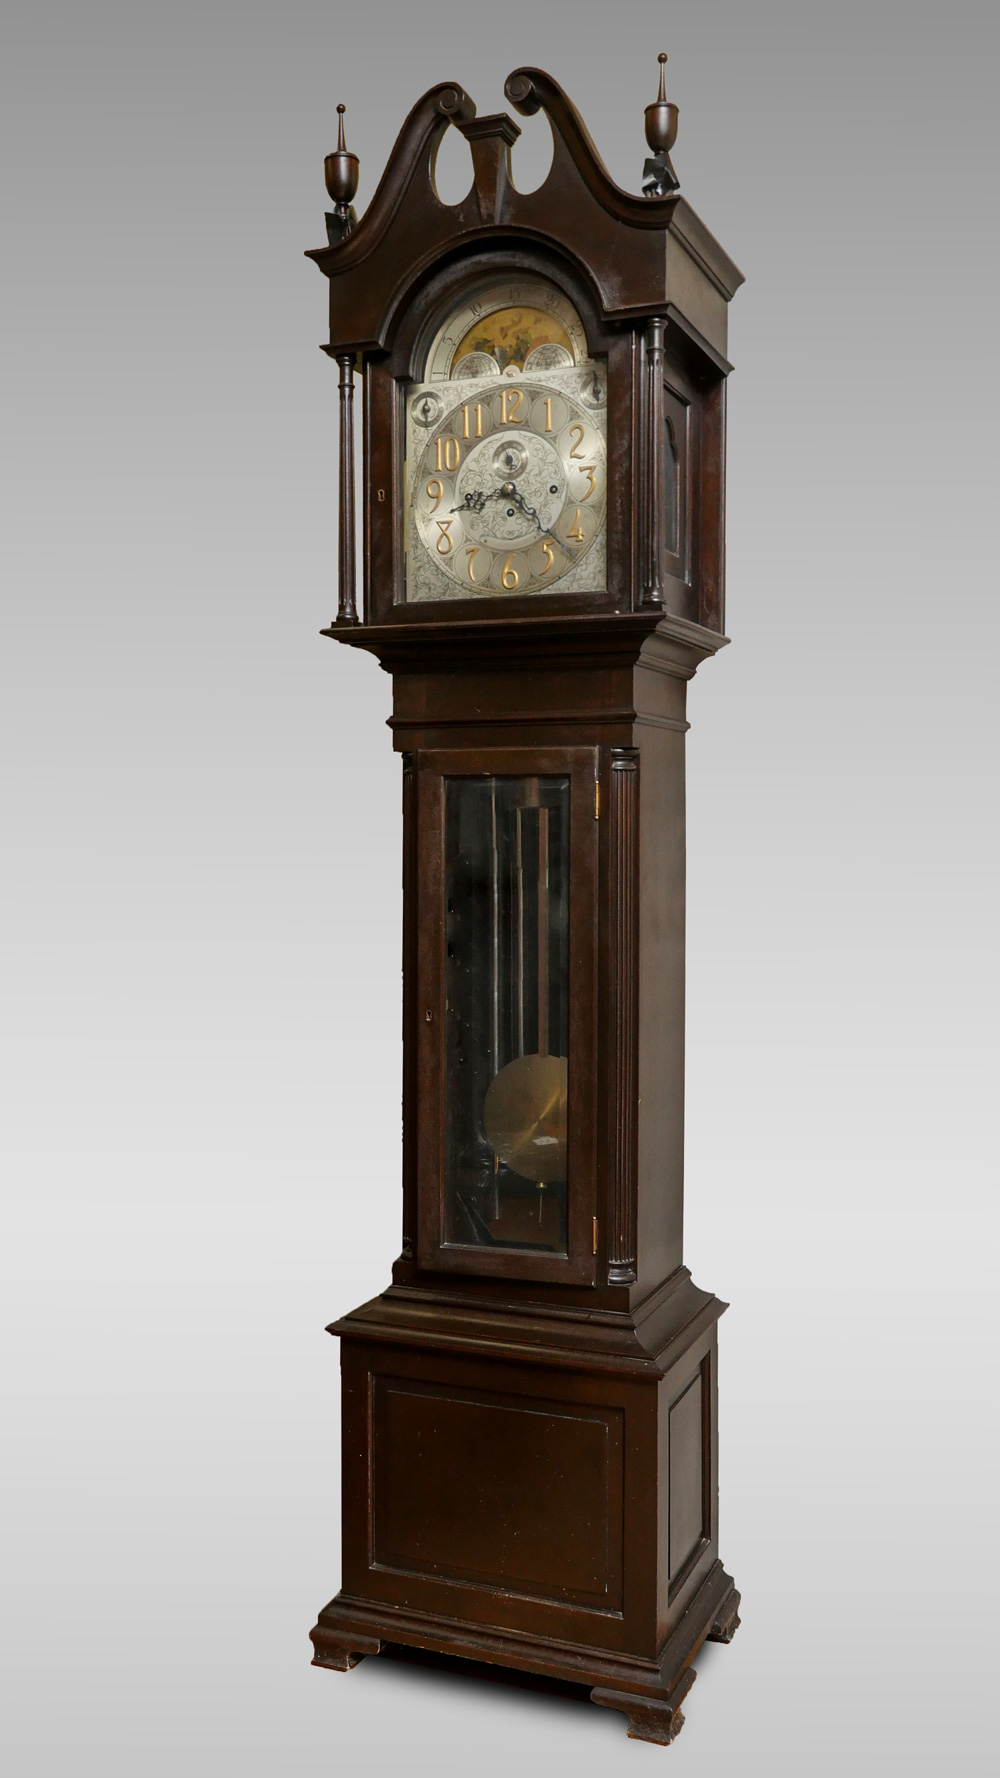 HERSCHEDES 6 TUBE GRANDFATHER CLOCK: